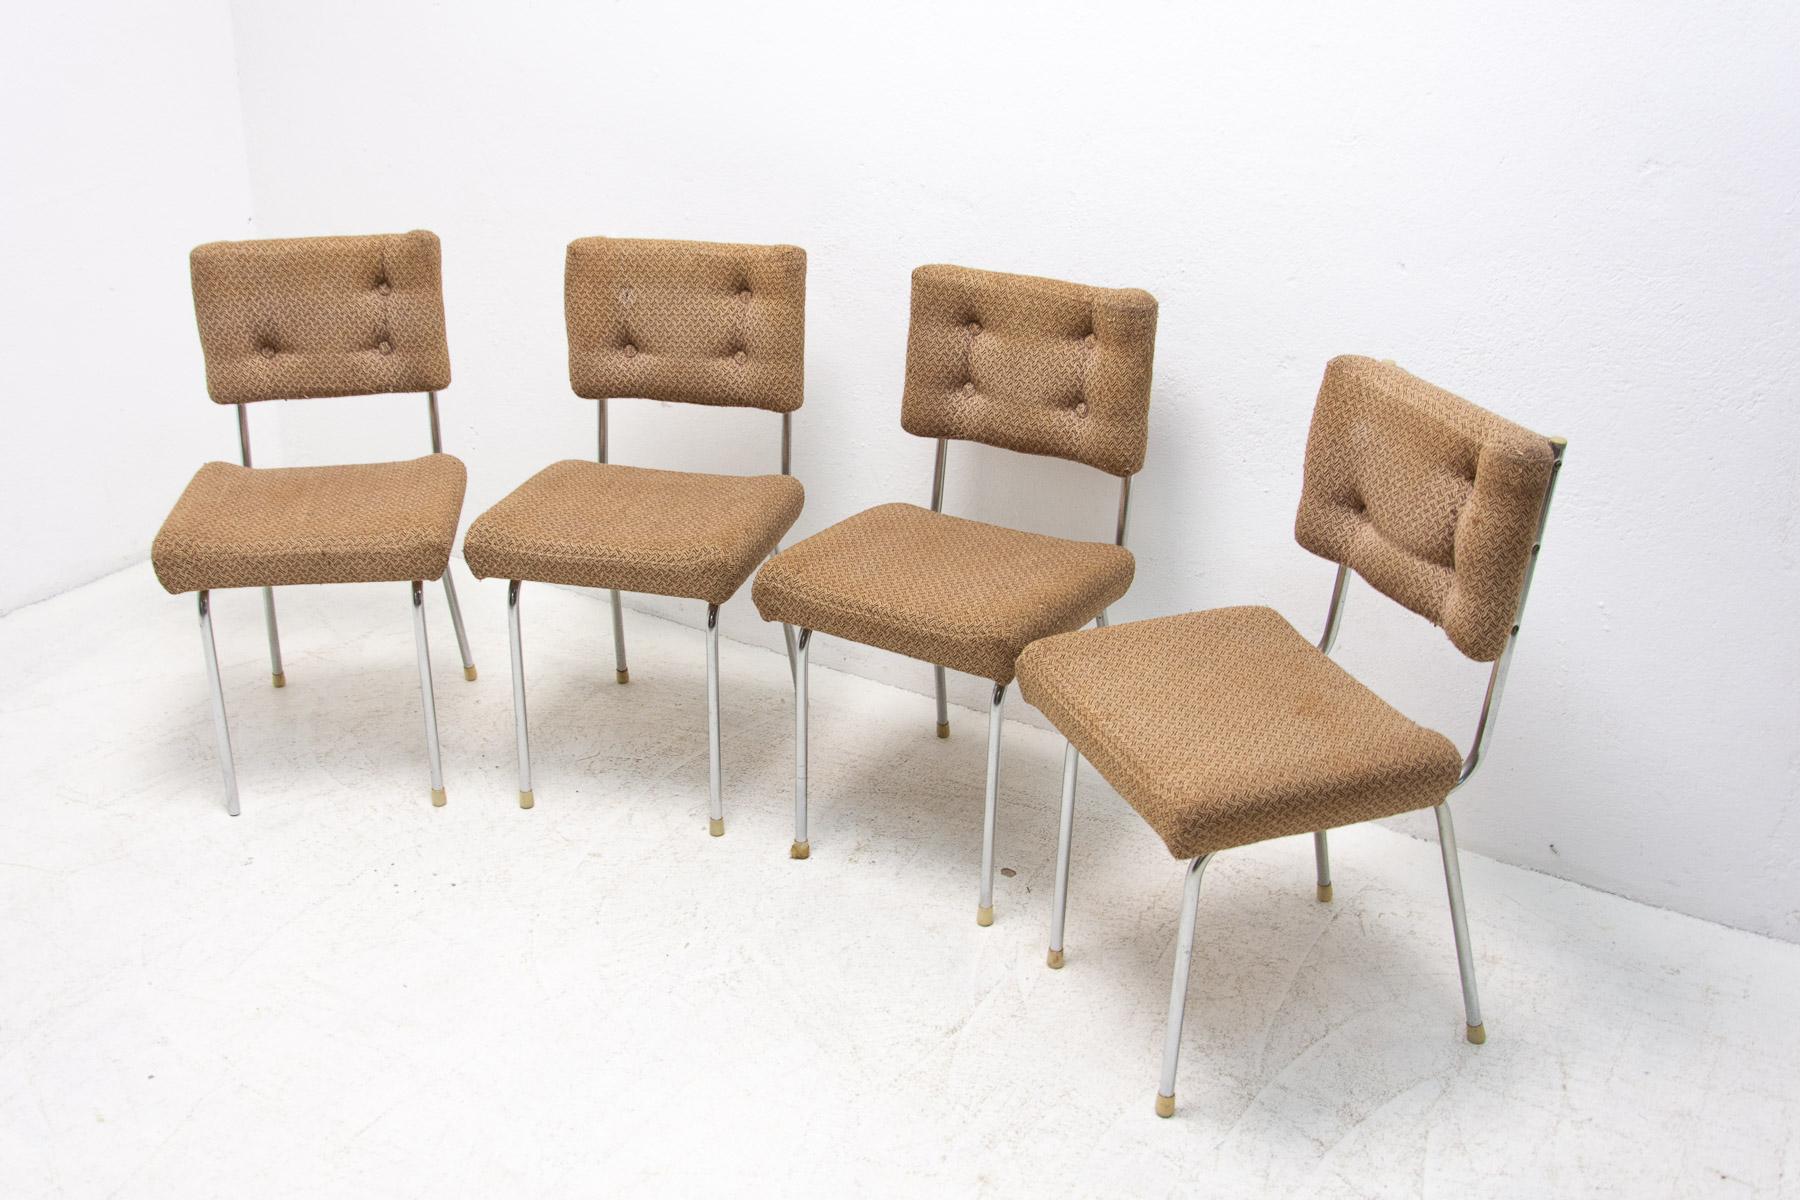 Czech Eastern Bloc Midcentury Chromed Cafe Chairs, 1960's For Sale